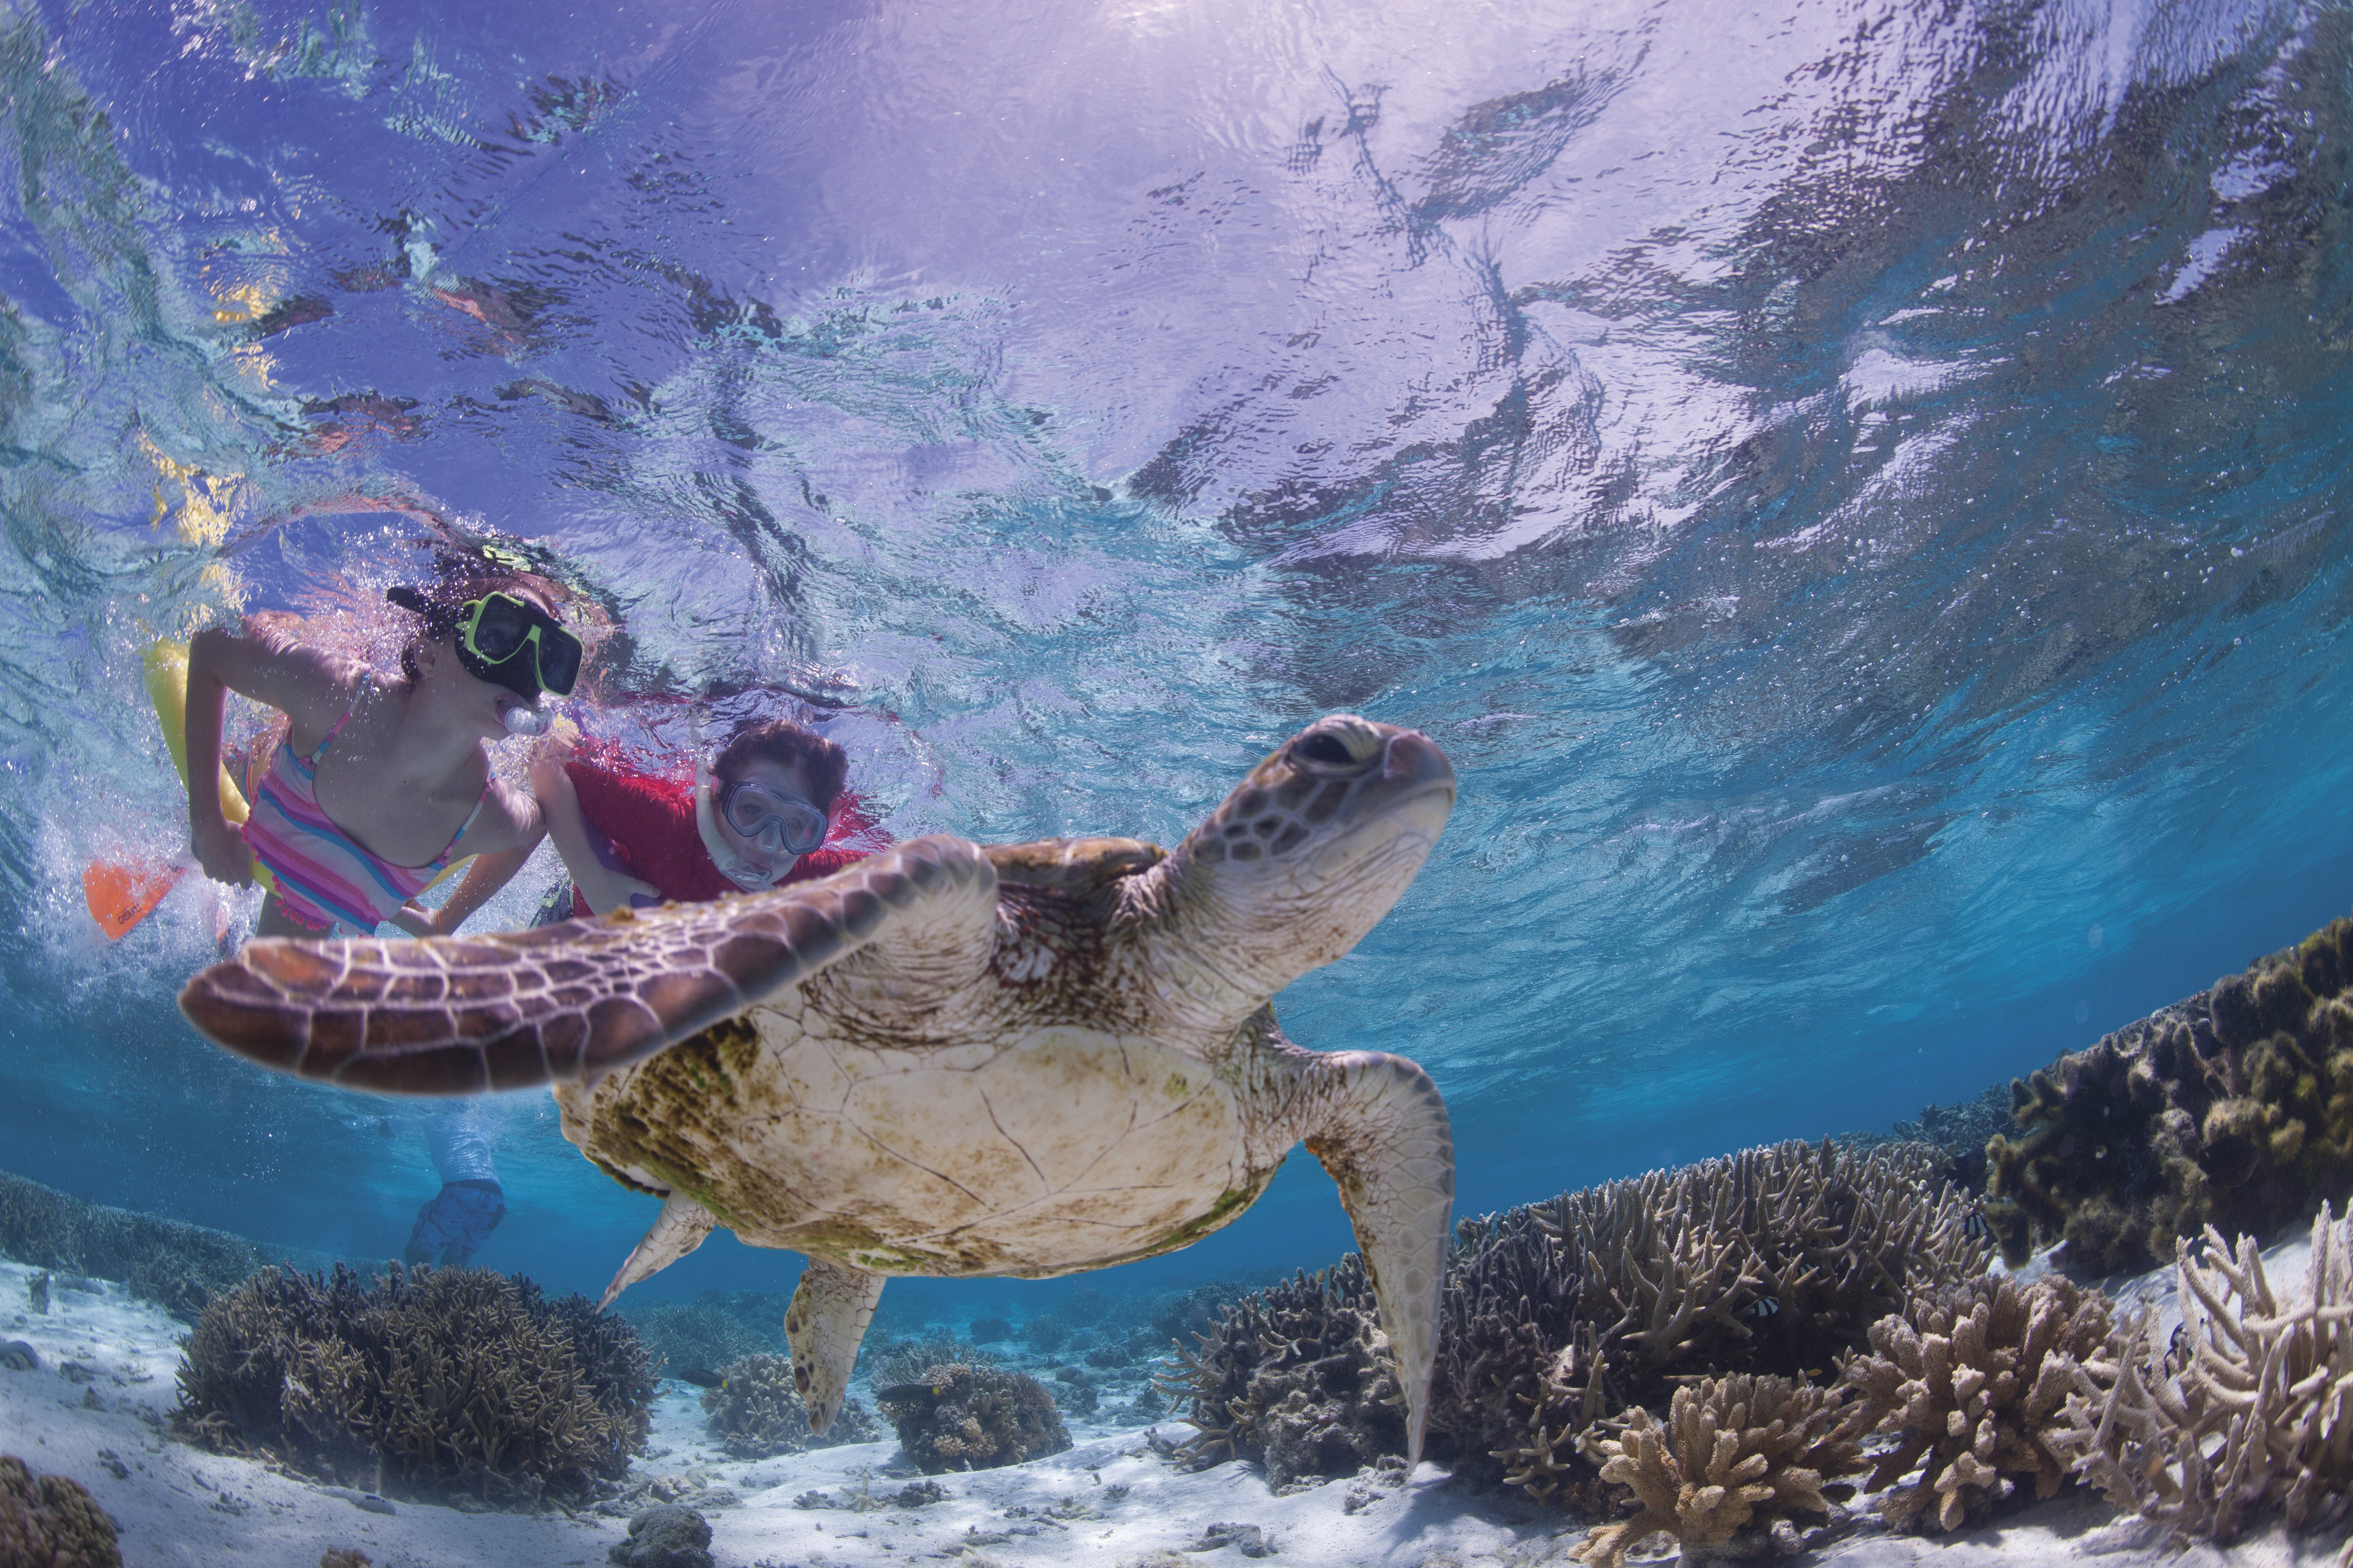 Family Travel - What kids think of snorkels, sun and sea turtles on Lady Musgrave Island